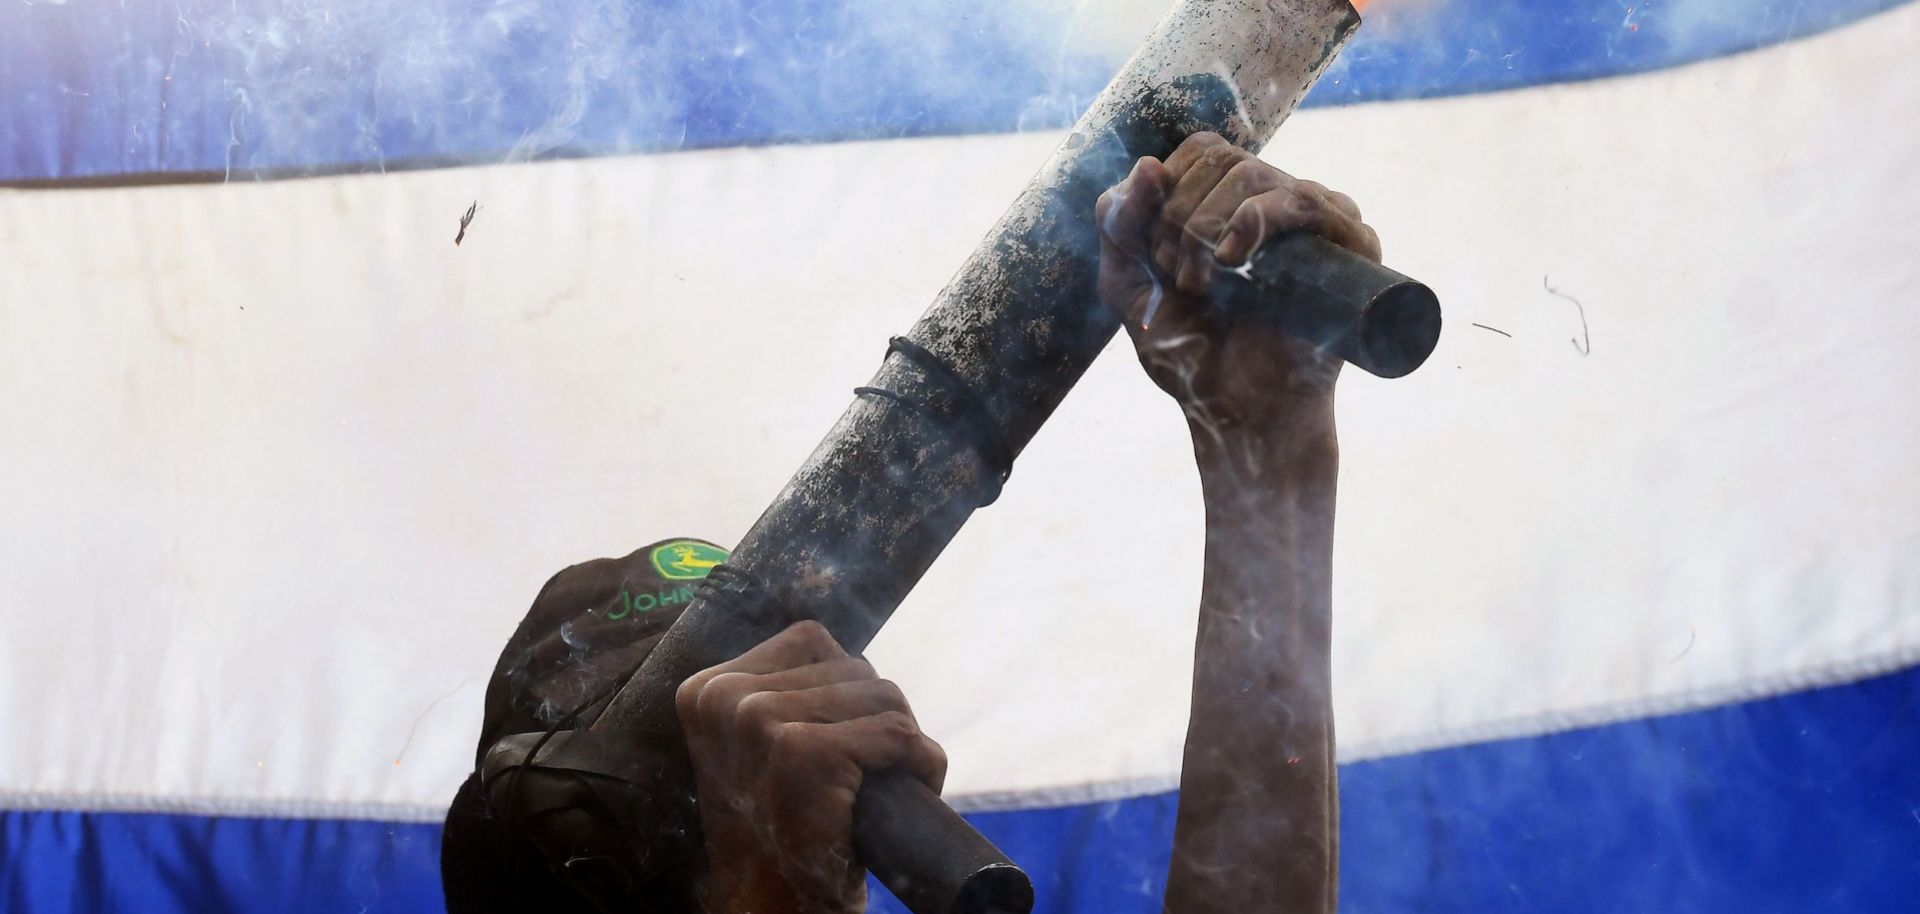 A protester with the April 19th movement in Masaya, Nicaragua, fires a homemade mortar into the air on June 18, 2018.